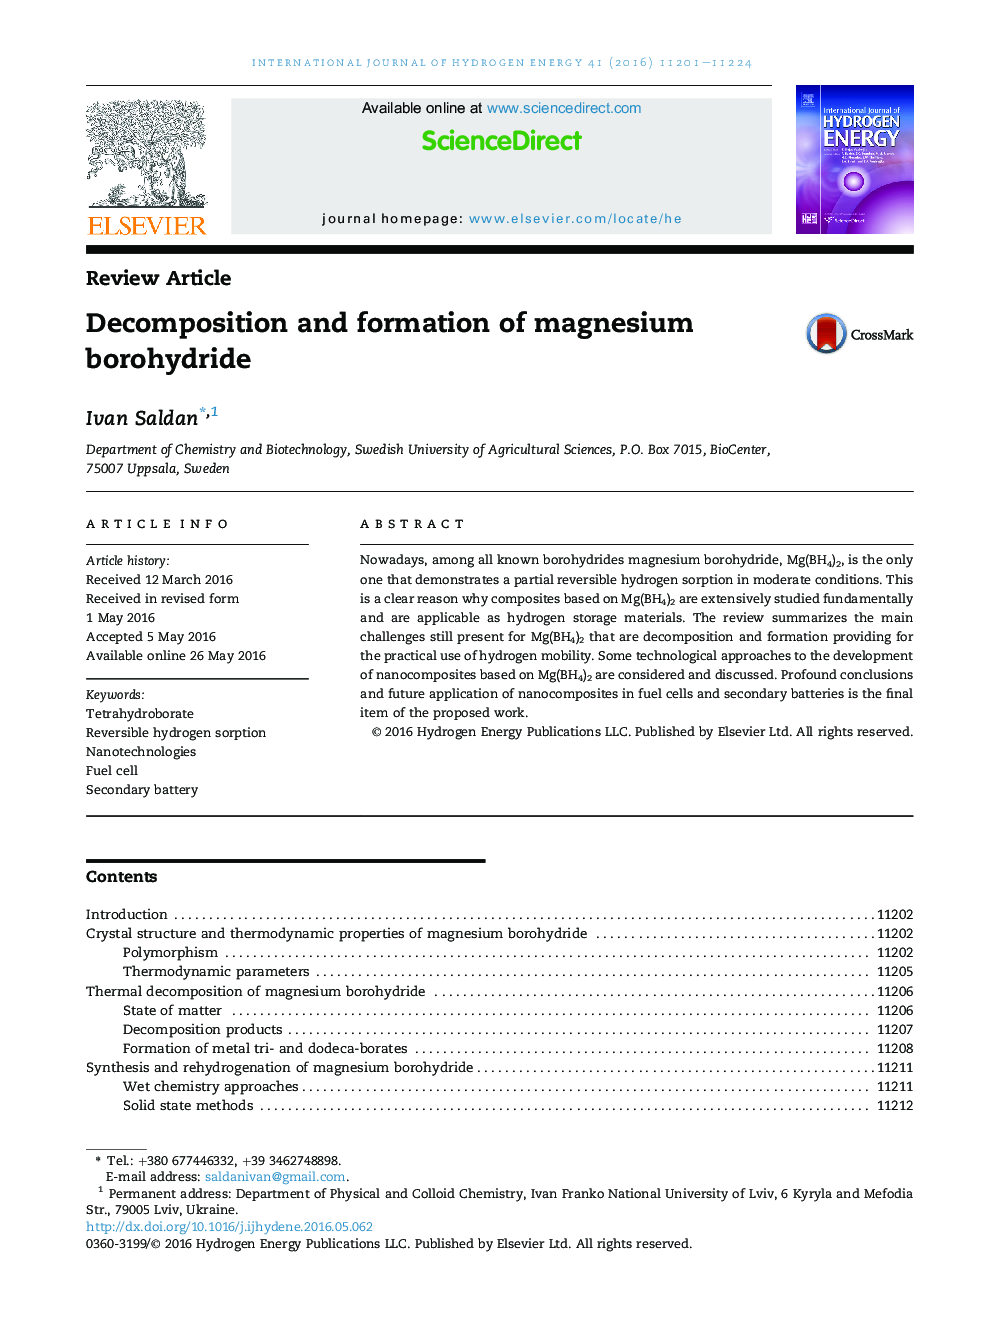 Decomposition and formation of magnesium borohydride